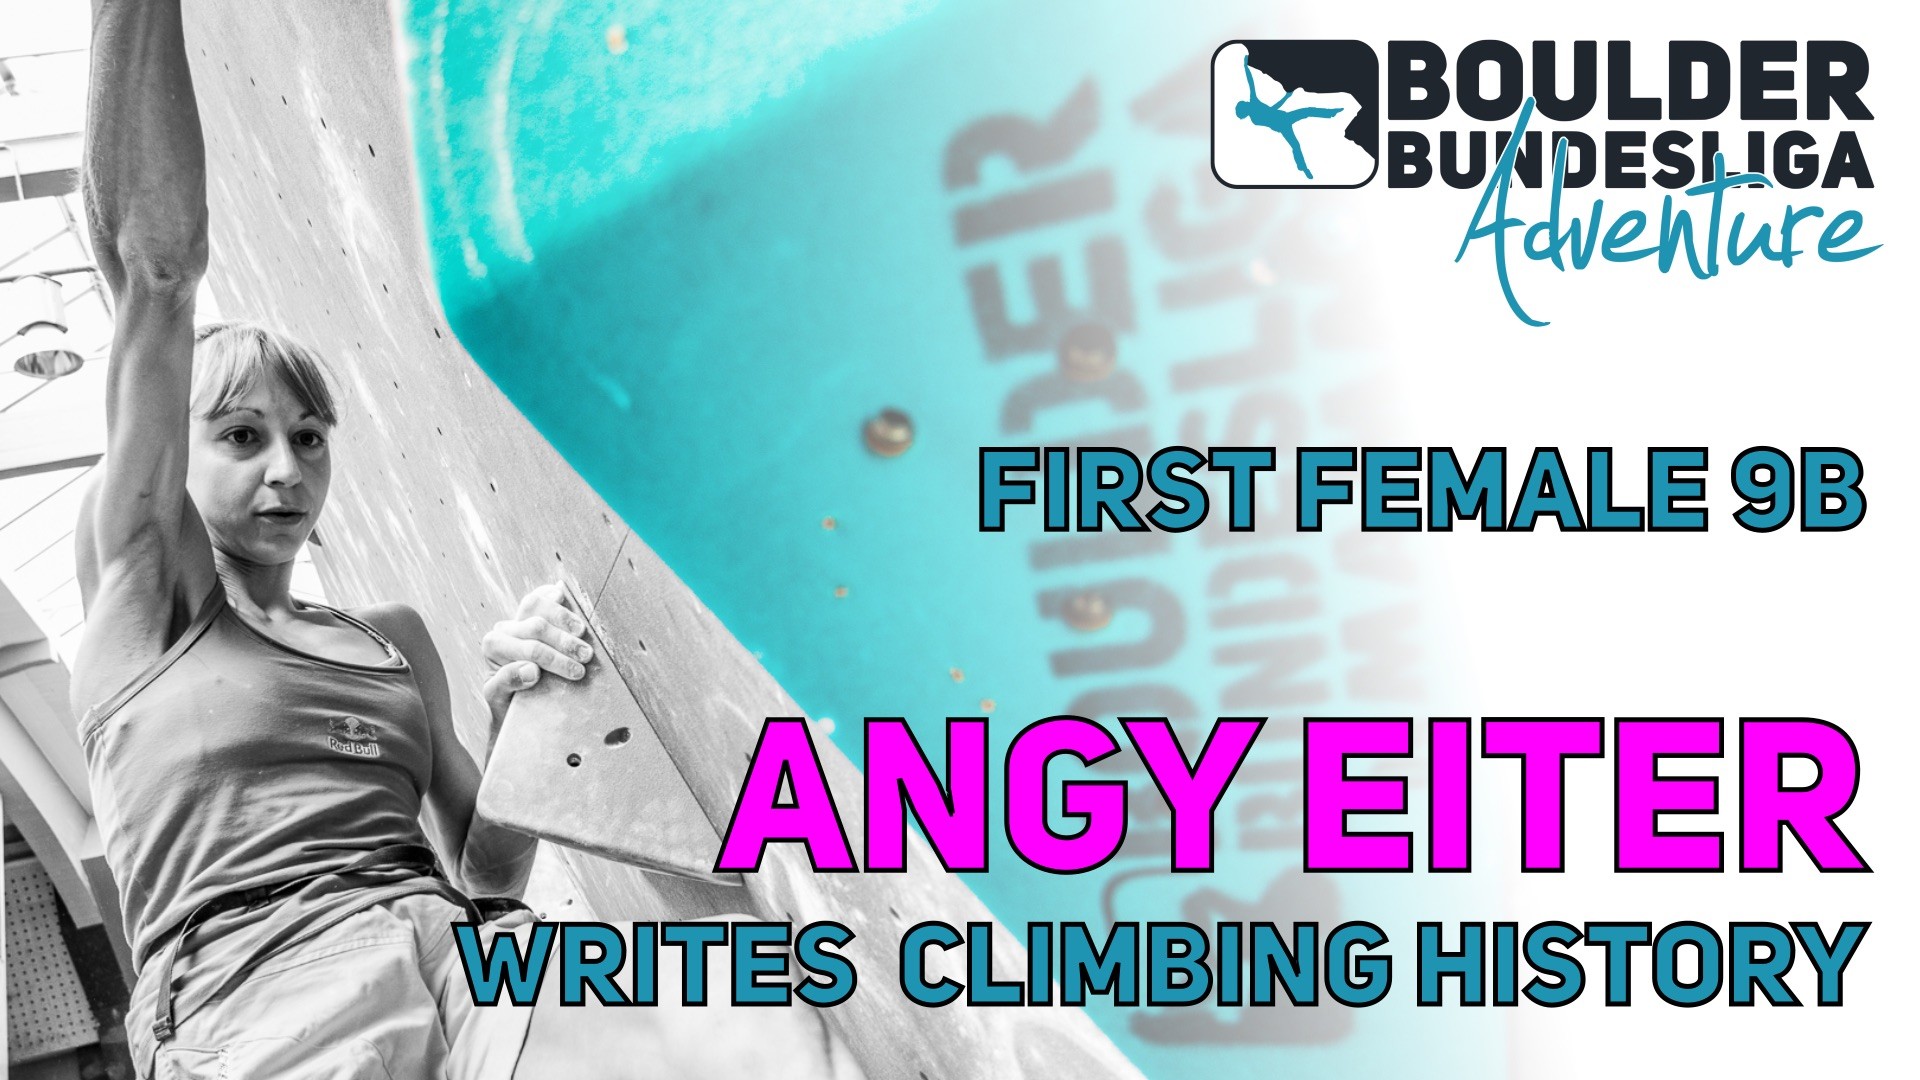 First female 9b by Angy Eiter